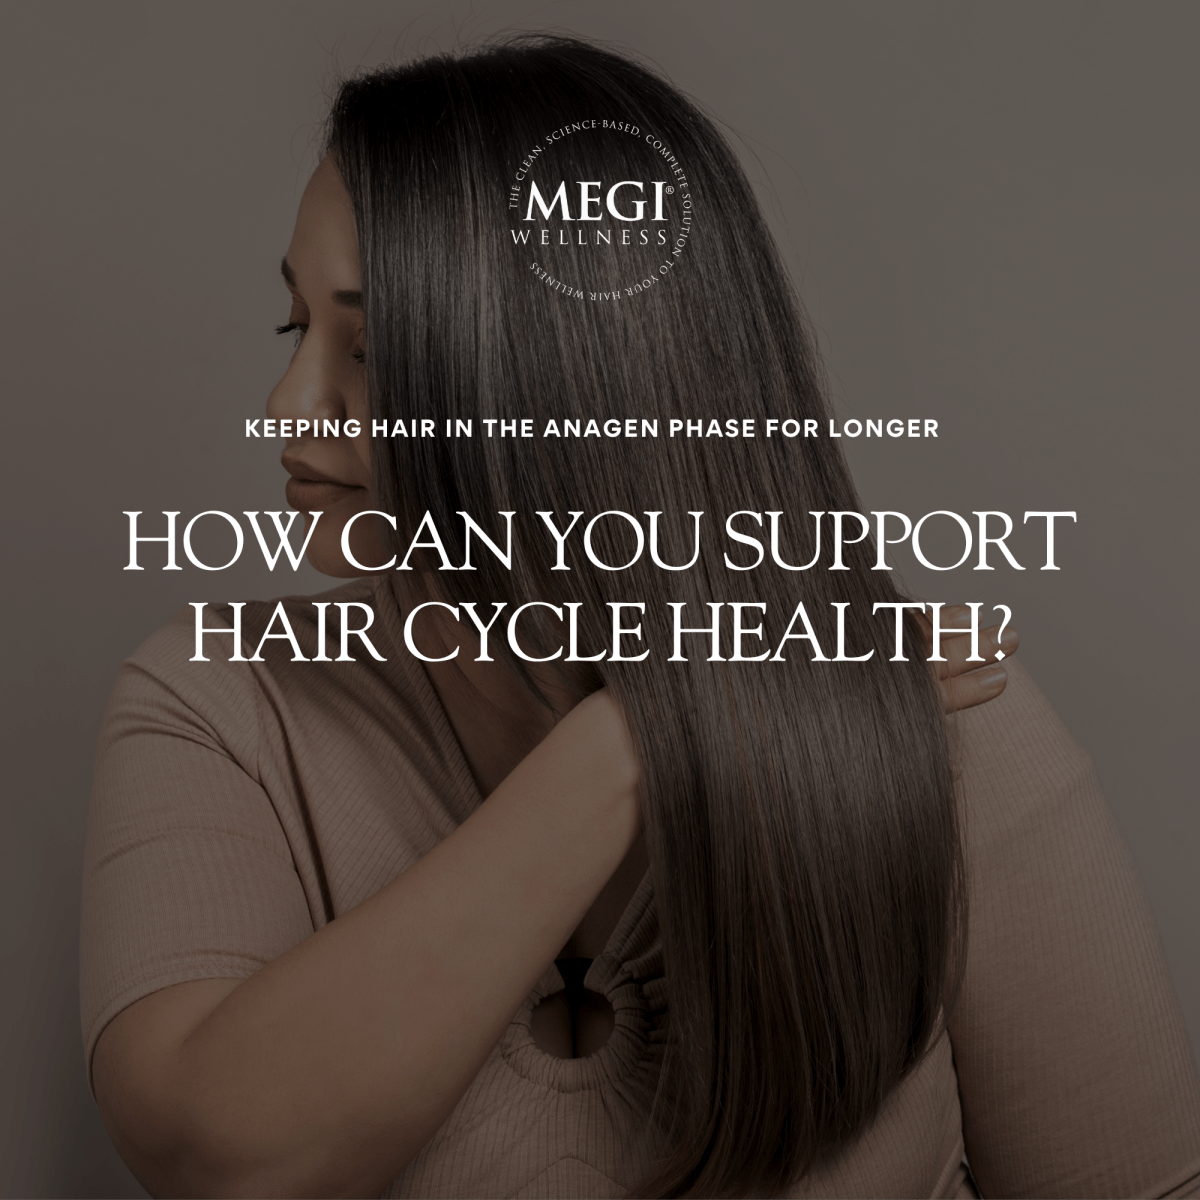 How can you support your hair health and keep it in the Anagen phase for longer? - MEGIWellness